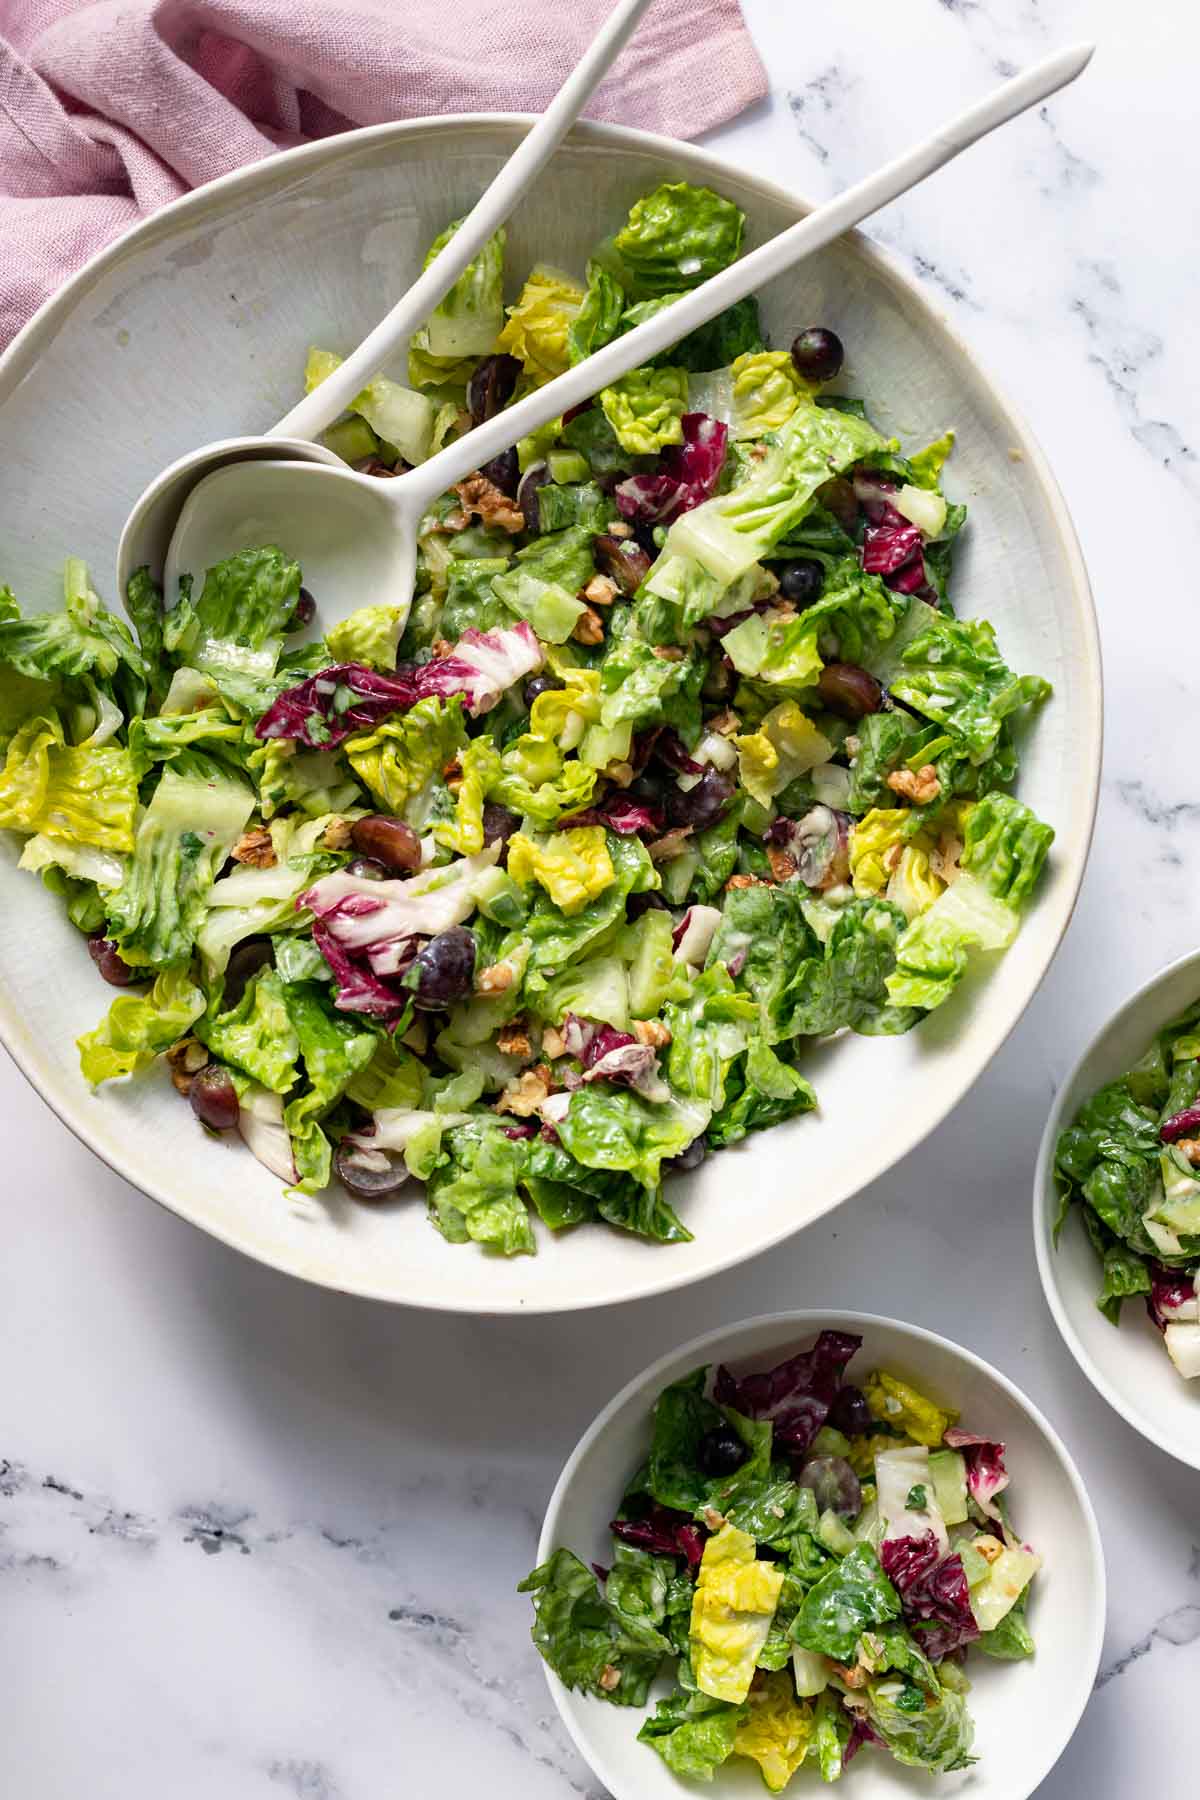 Salad with Grapes, Walnuts & Blue Cheese Dressing